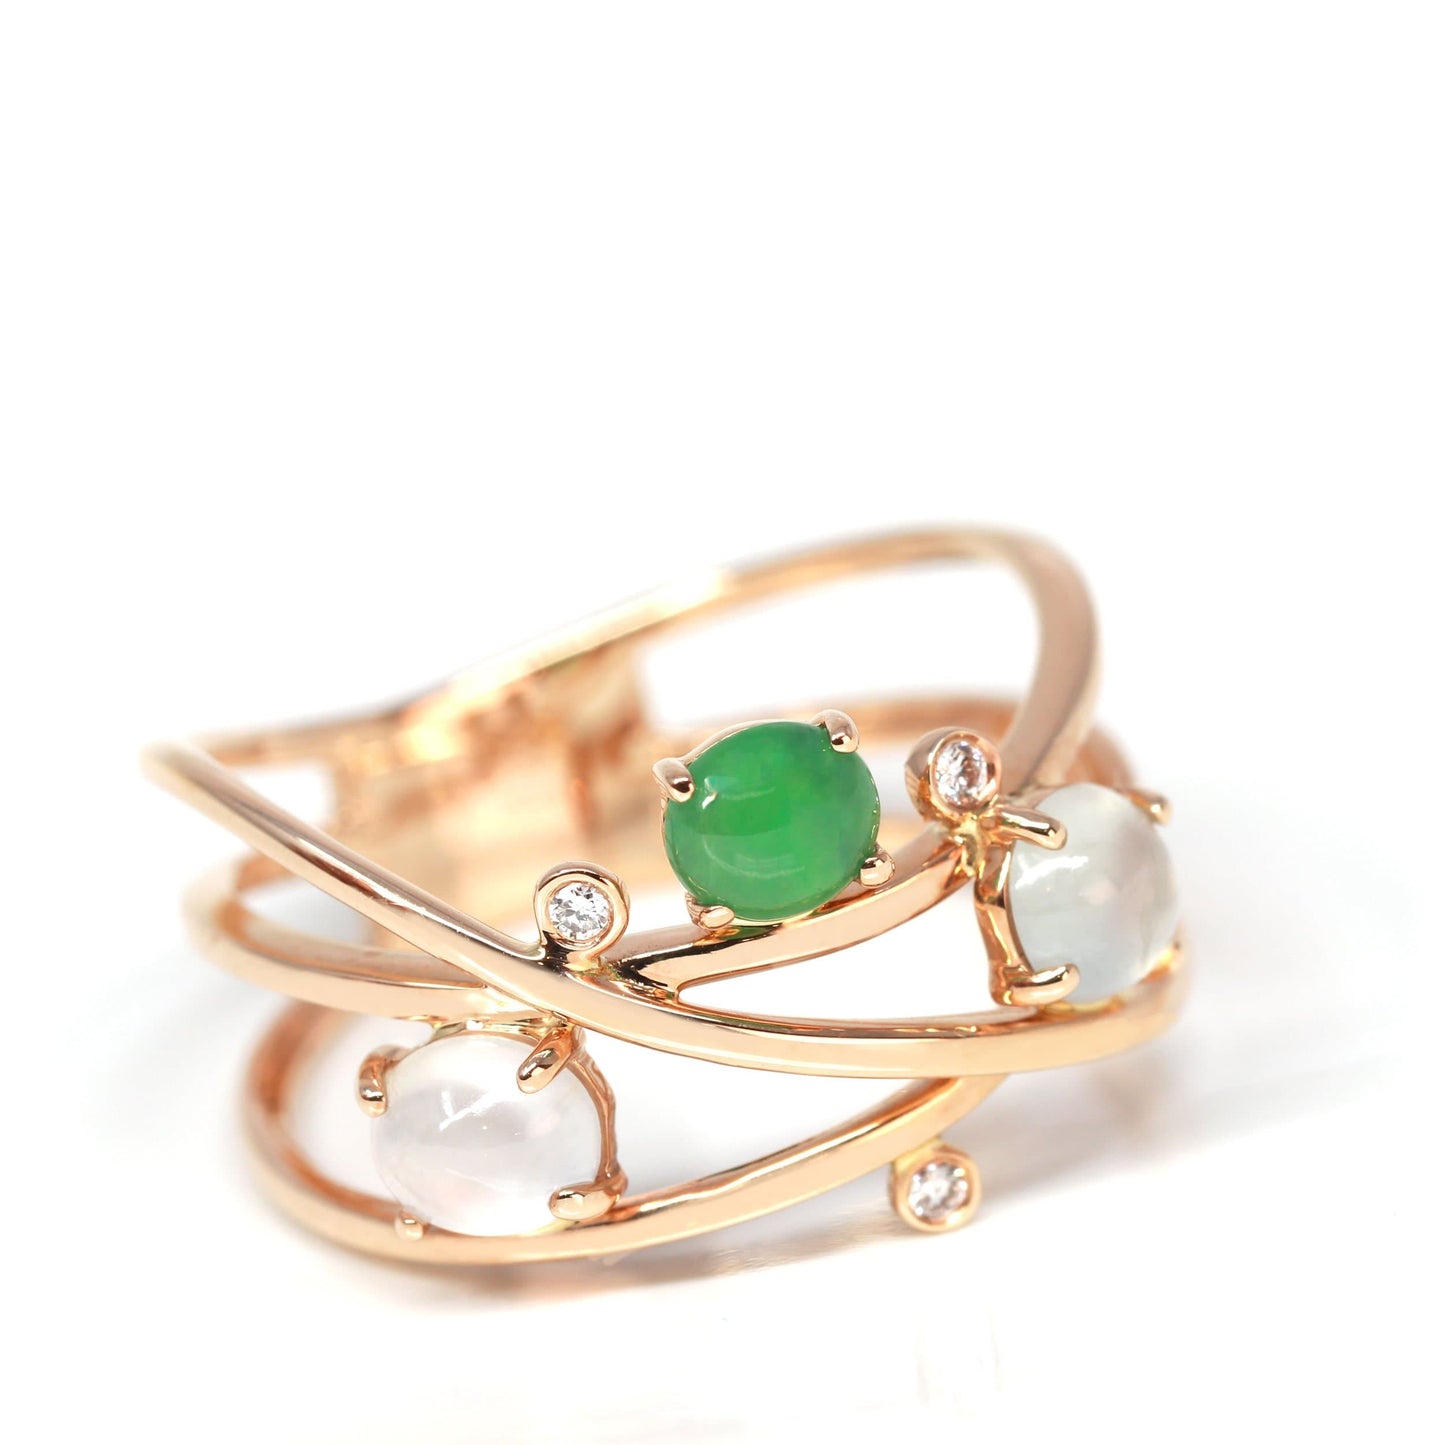 RealJade® "Bubble Collection" 18k Rose Gold Natural Ice/ Multi-Colored Jadeite Ring With Diamonds